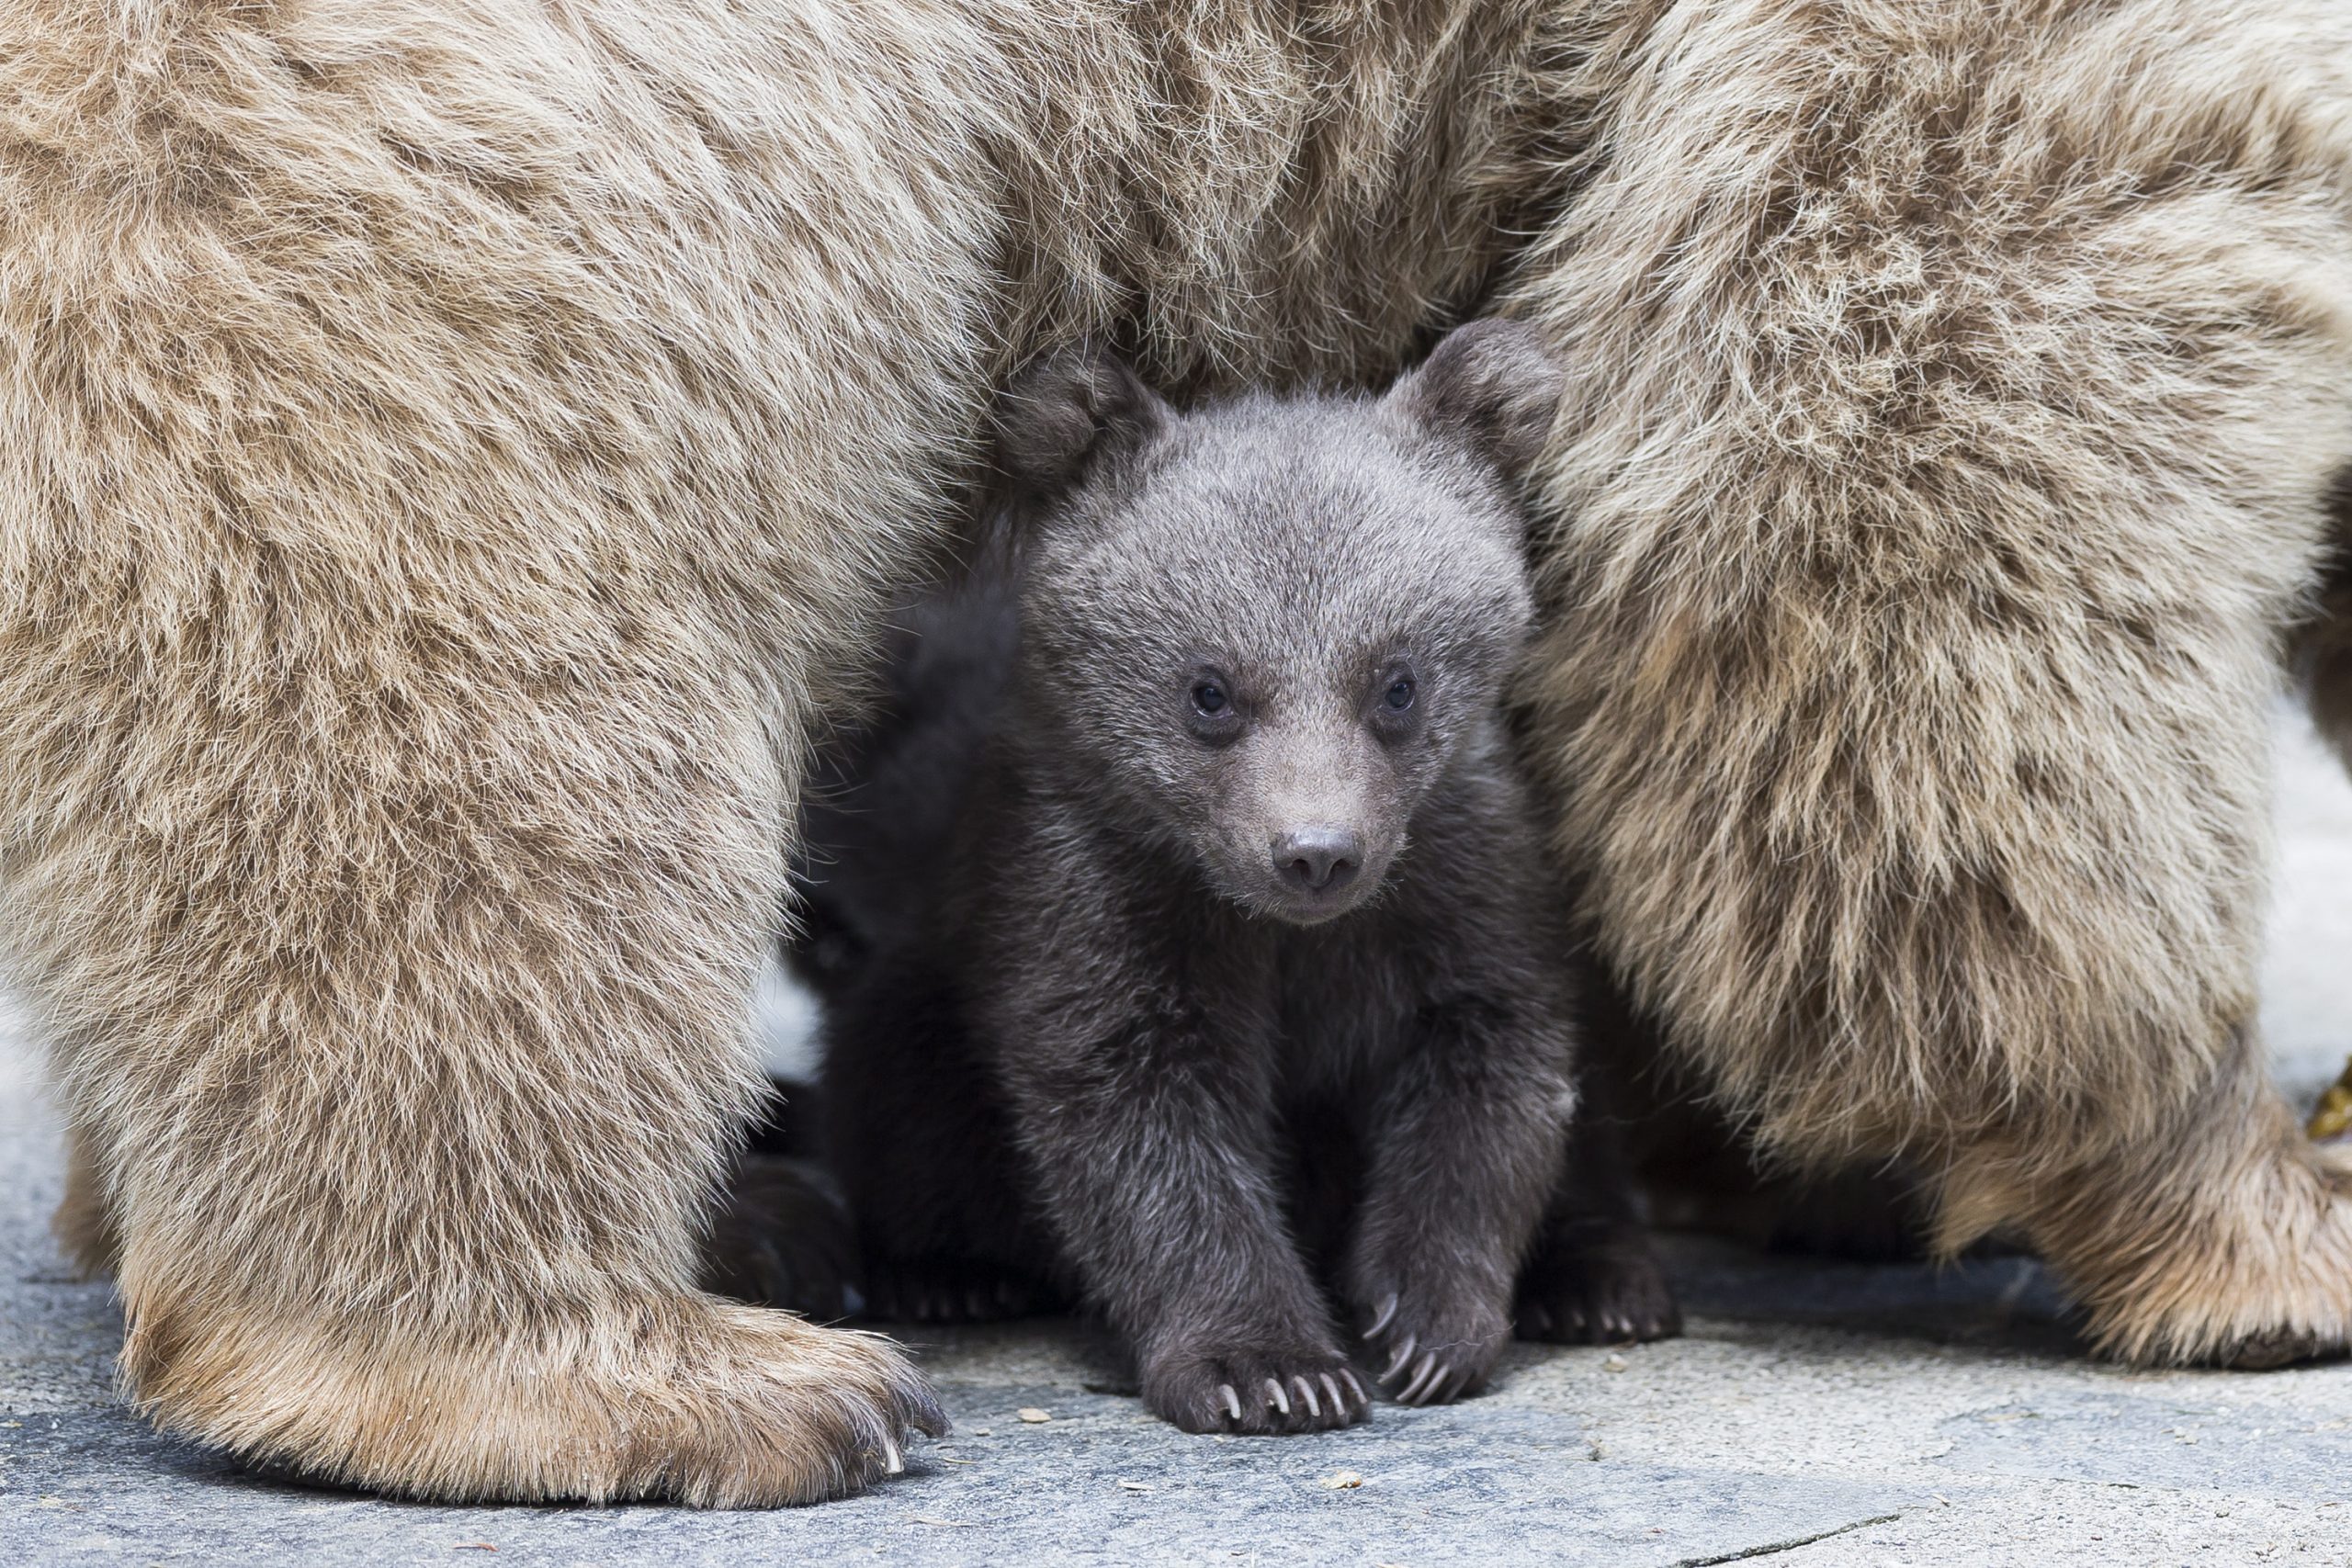 epa08418632 (04/50) A Syrian brown bear cub plays with its mother 'Martine' in their enclosure at the zoo of Servion, Switzerland, 17 April 2018 (reissued 13 May 2020).

The color brown is associated with all things nature: Earth, soil, wood, and the seasons of fall and winter. Brown is the color of hearth and home and symbolizes stability, reliability, dependability, honesty, and comfort. A natural, neutral color, it is often perceived as solid, warm but can also - especially in comparison with other colors - appear drab and boring. In the arts, it is a composite color made by combining red, yellow, and blue (or red, yellow, and black).  EPA/CYRIL ZINGARO  ATTENTION: This Image is part of a PHOTO SET *** Local Caption *** 54270759